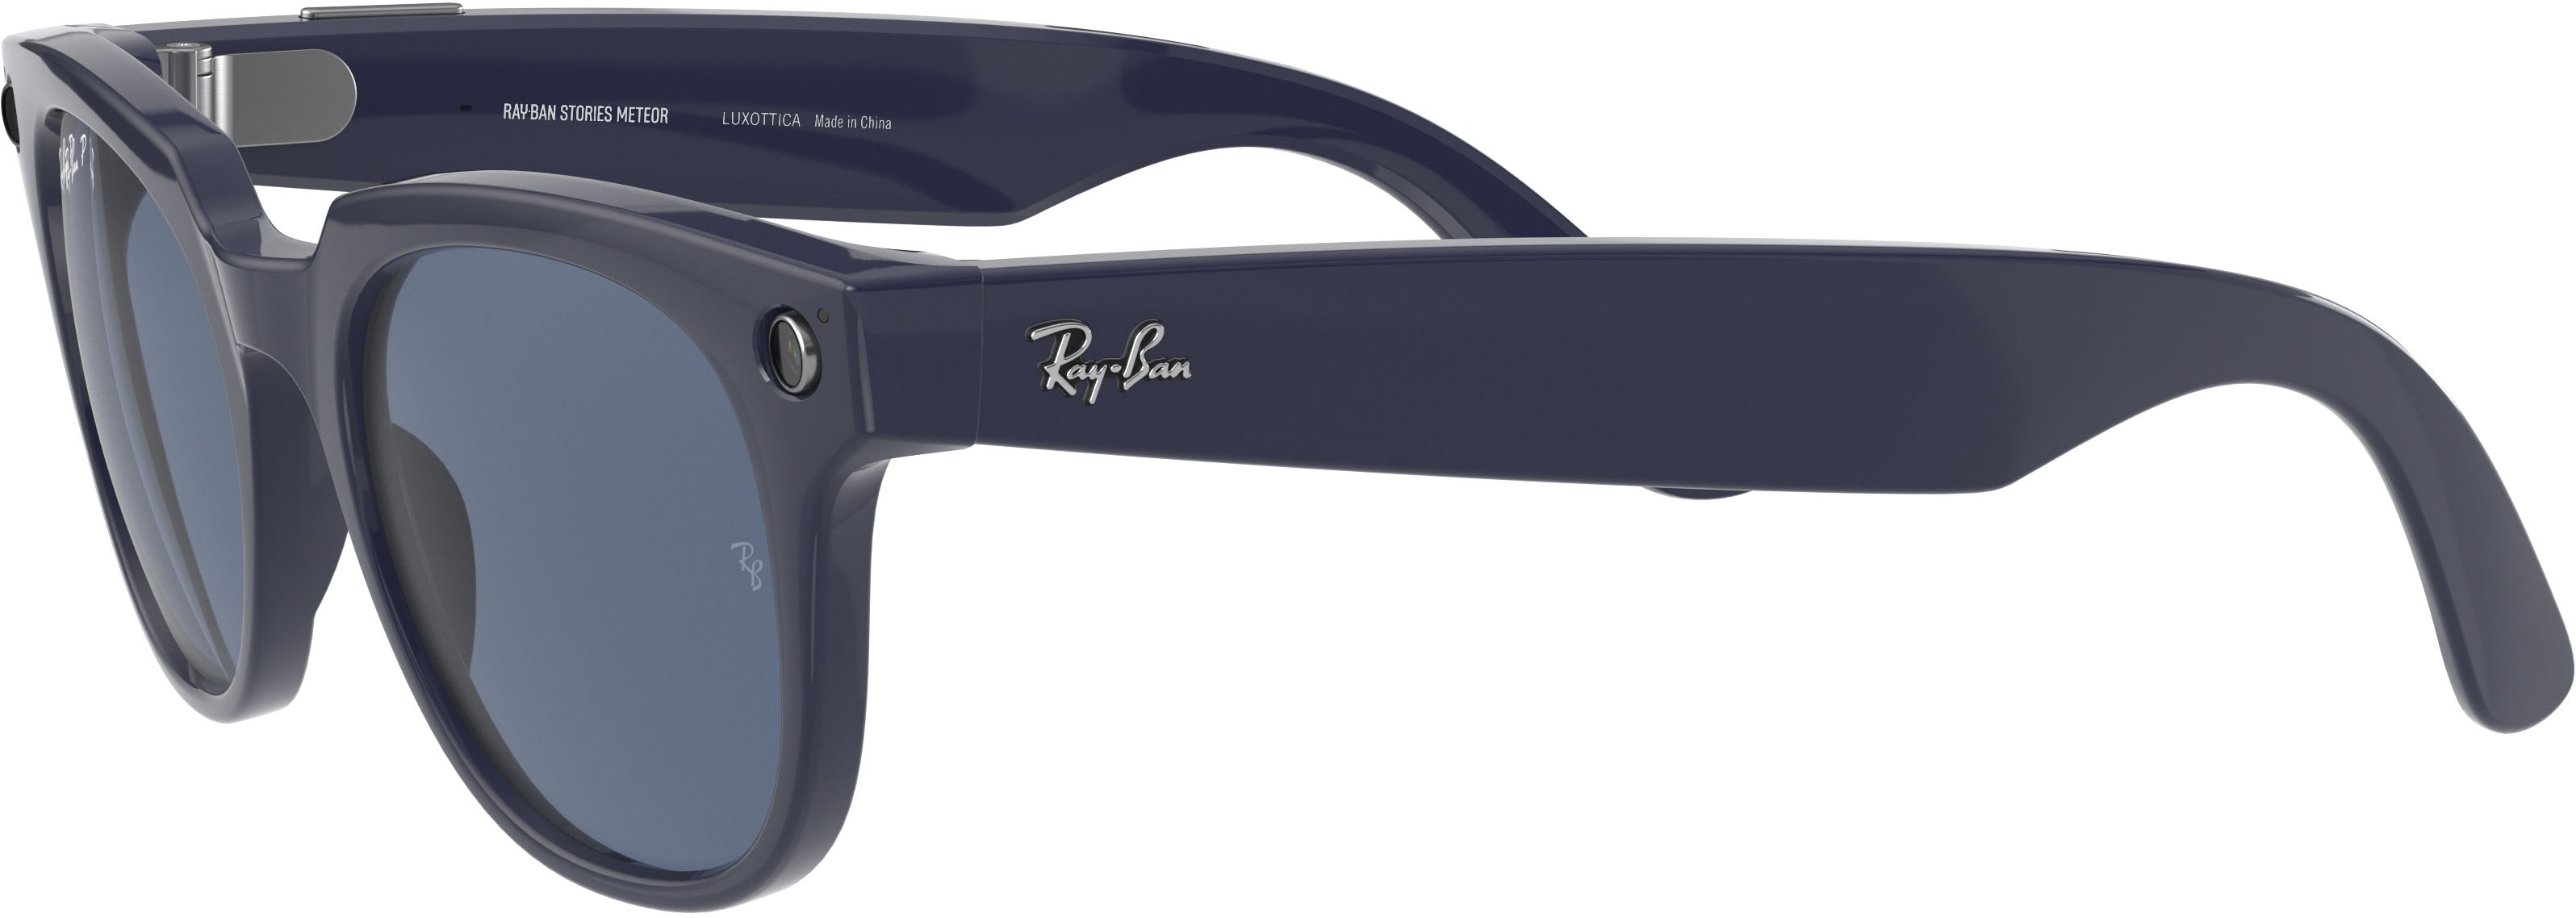 Left View: Ray-Ban - Stories Meteor Smart Glasses - Shiny Blue/Dark Blue Polarized